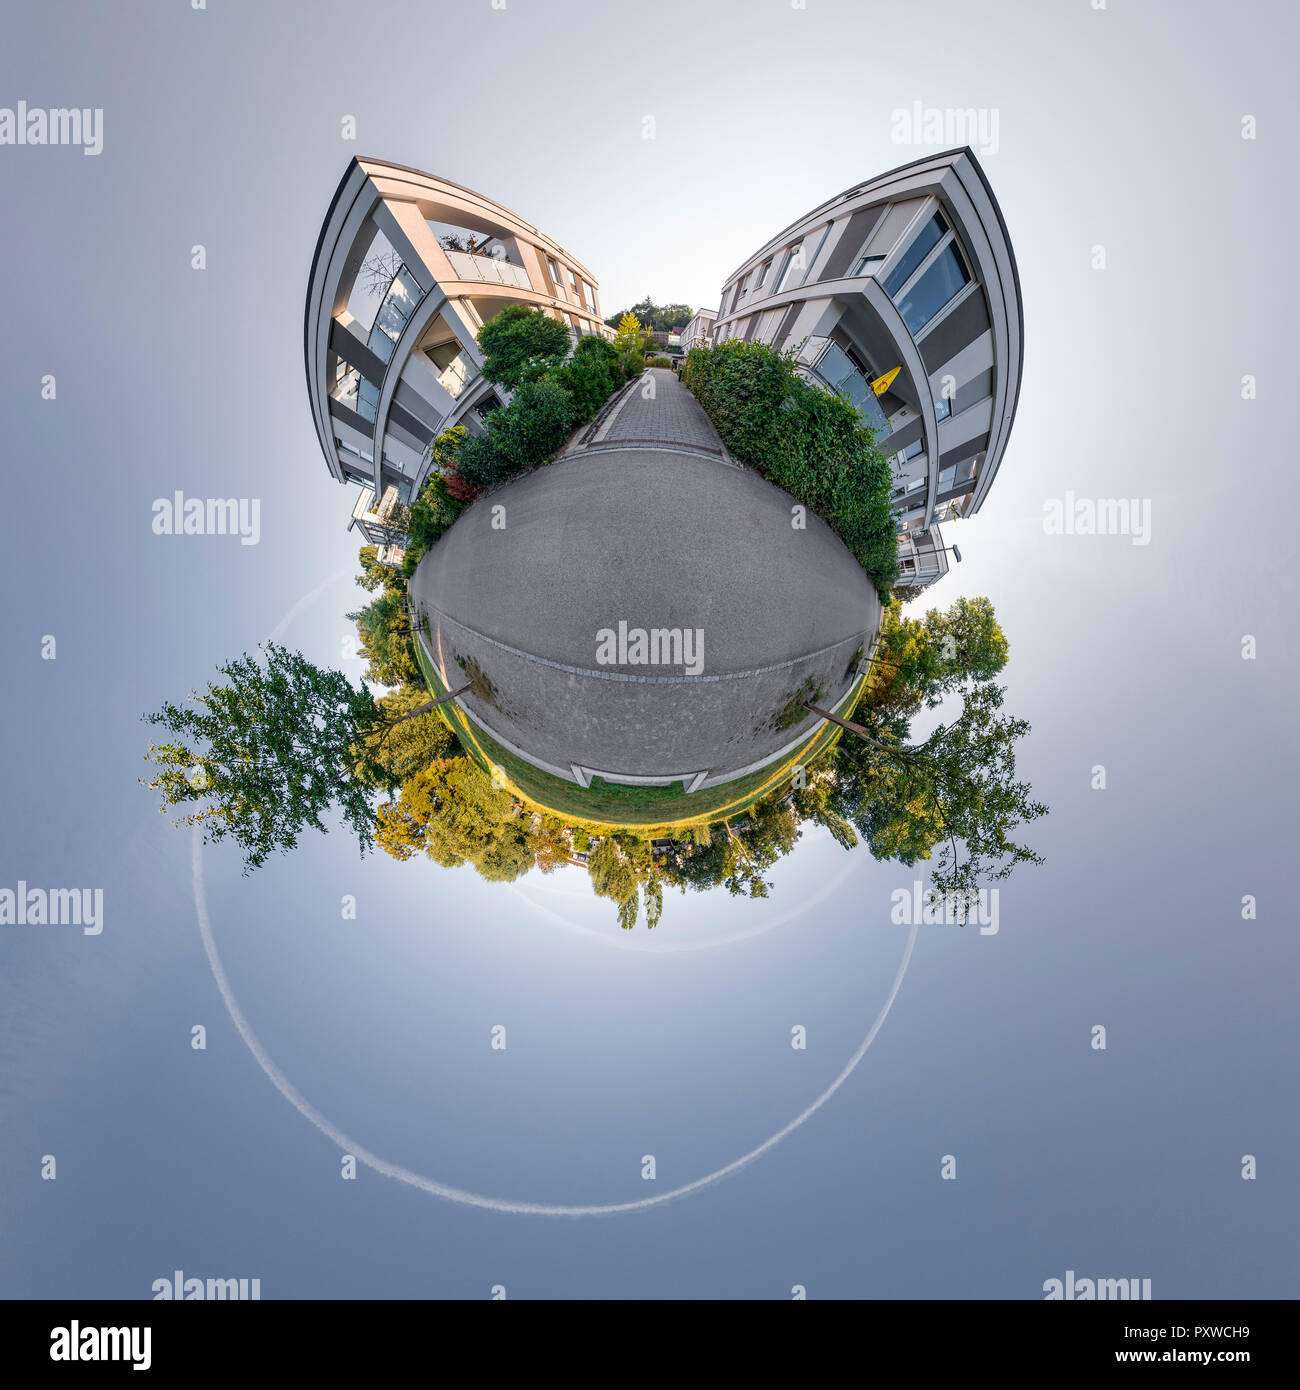 Little planet view, modern residential house Stock Photo